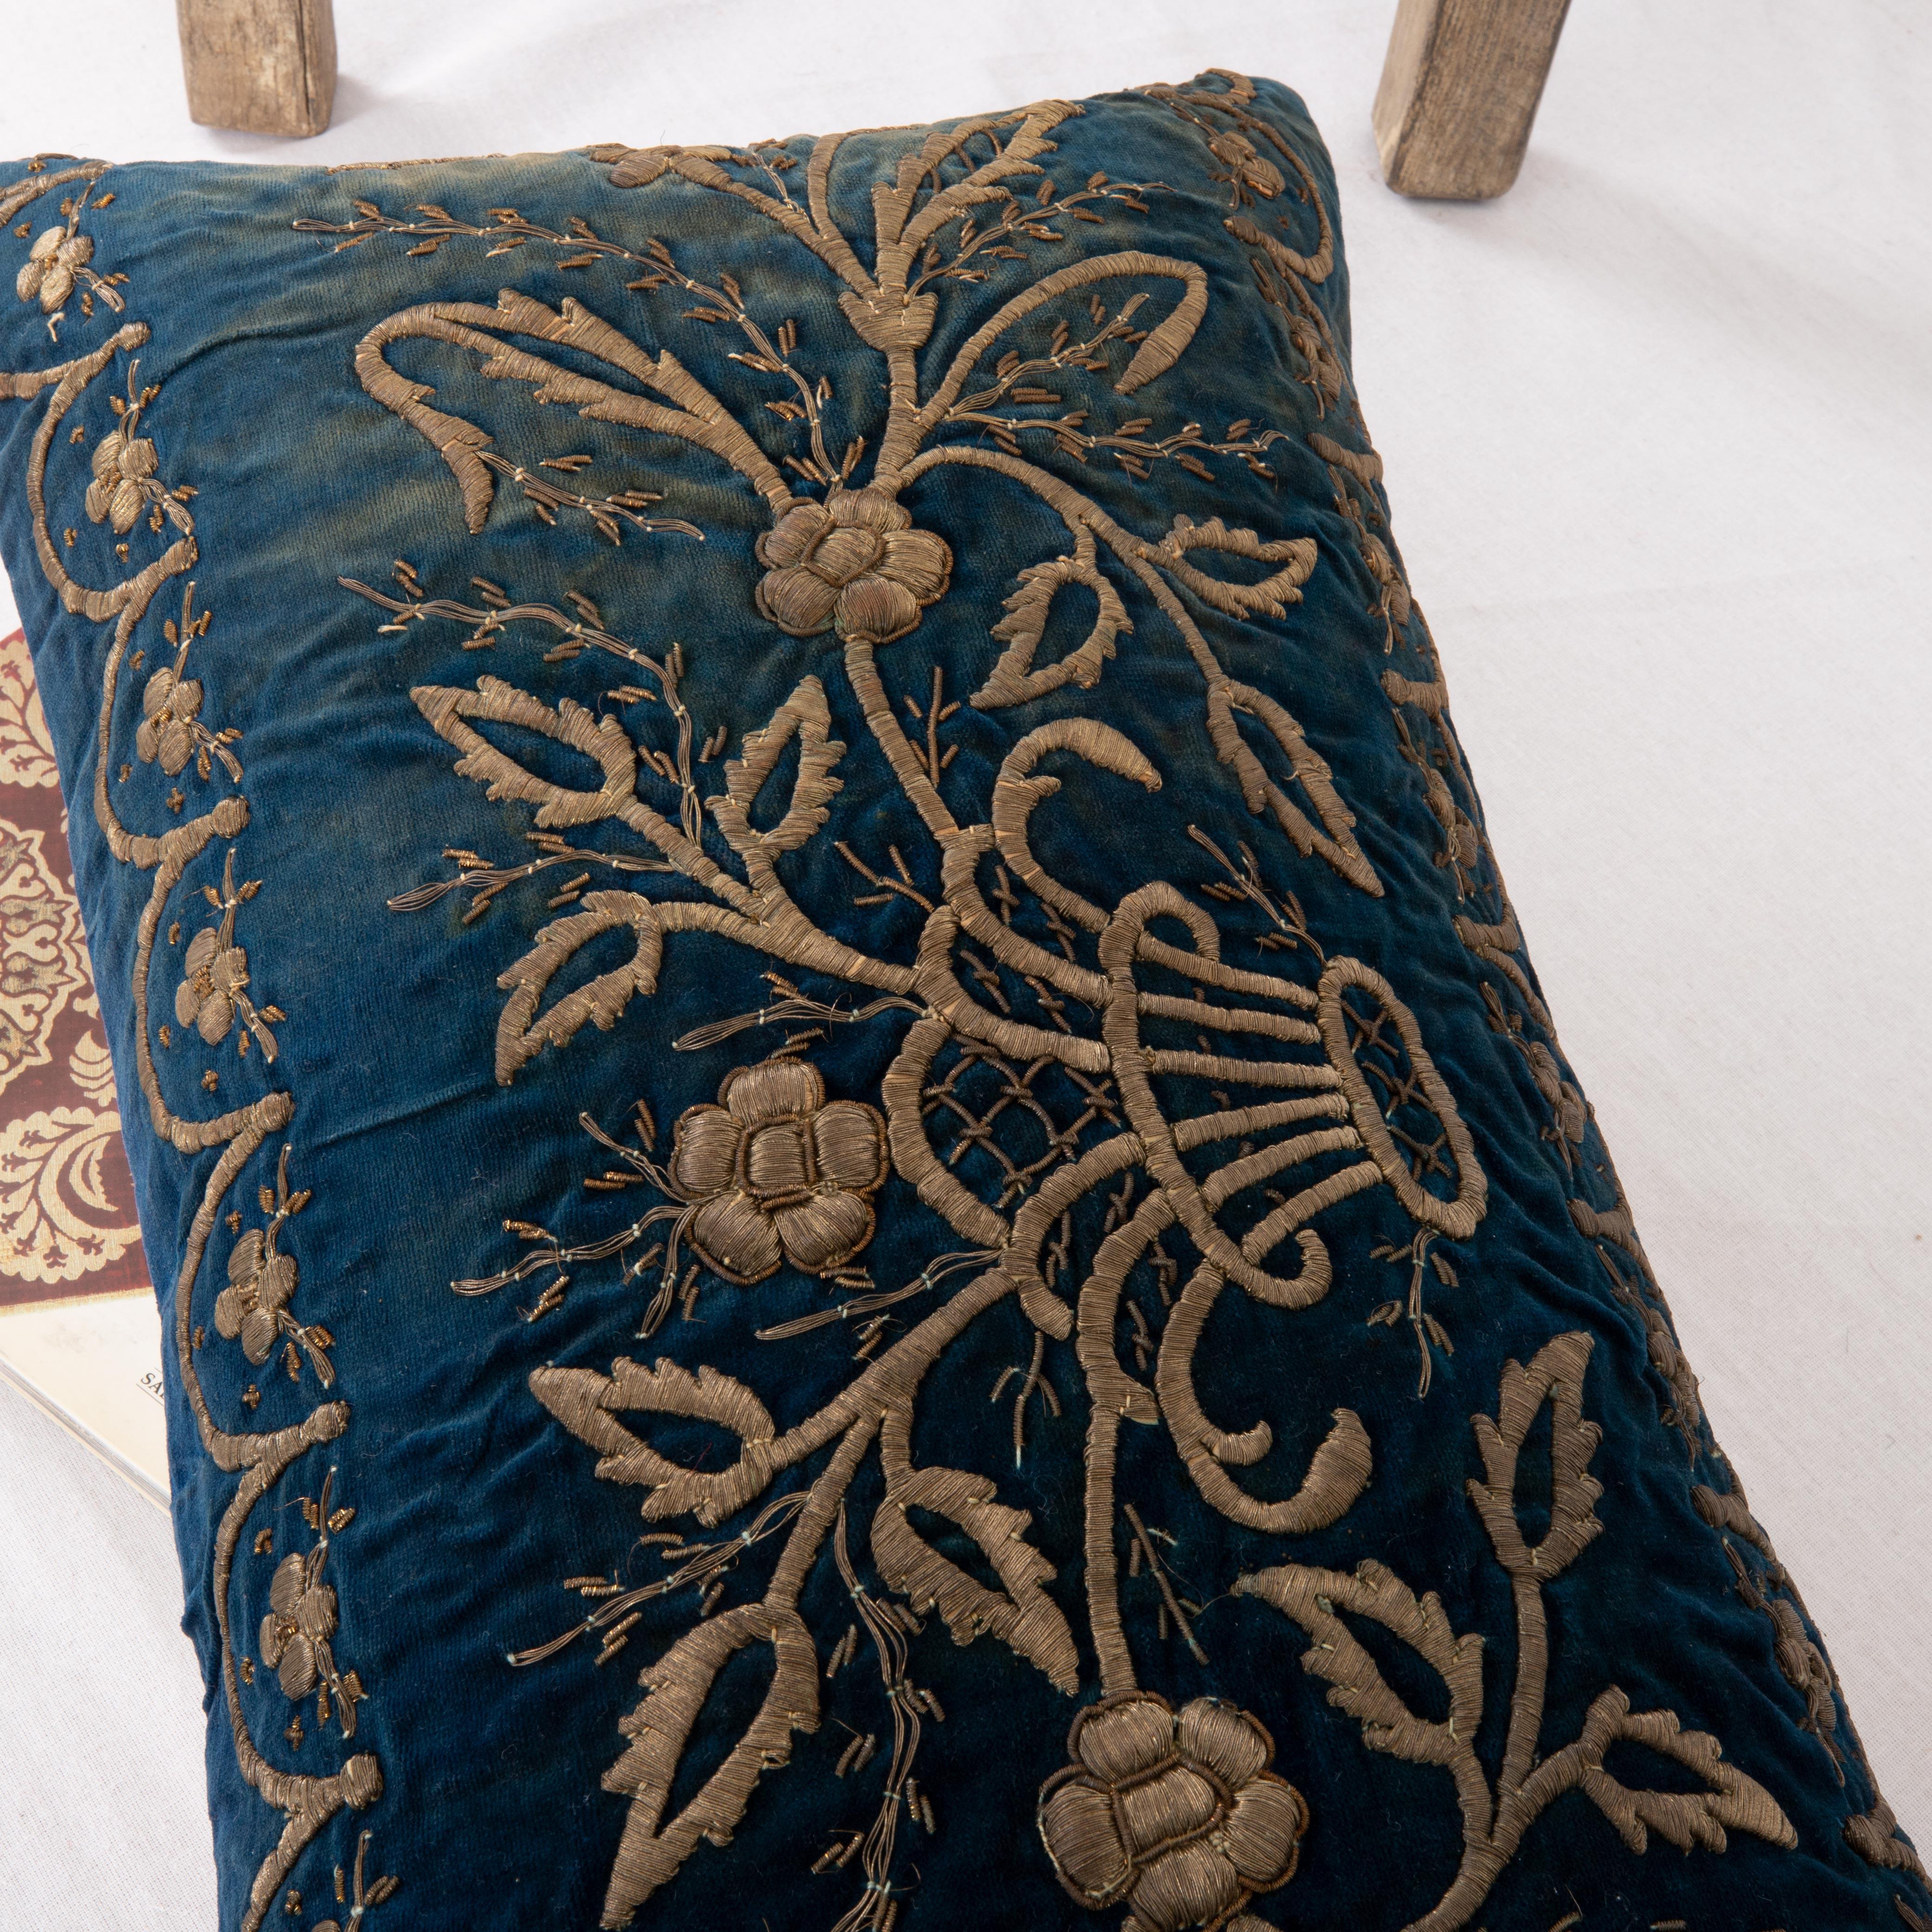 Embroidered Antique Silk Velvet Ottoman Blue Sarma Pillow Cover, L 19th Century For Sale